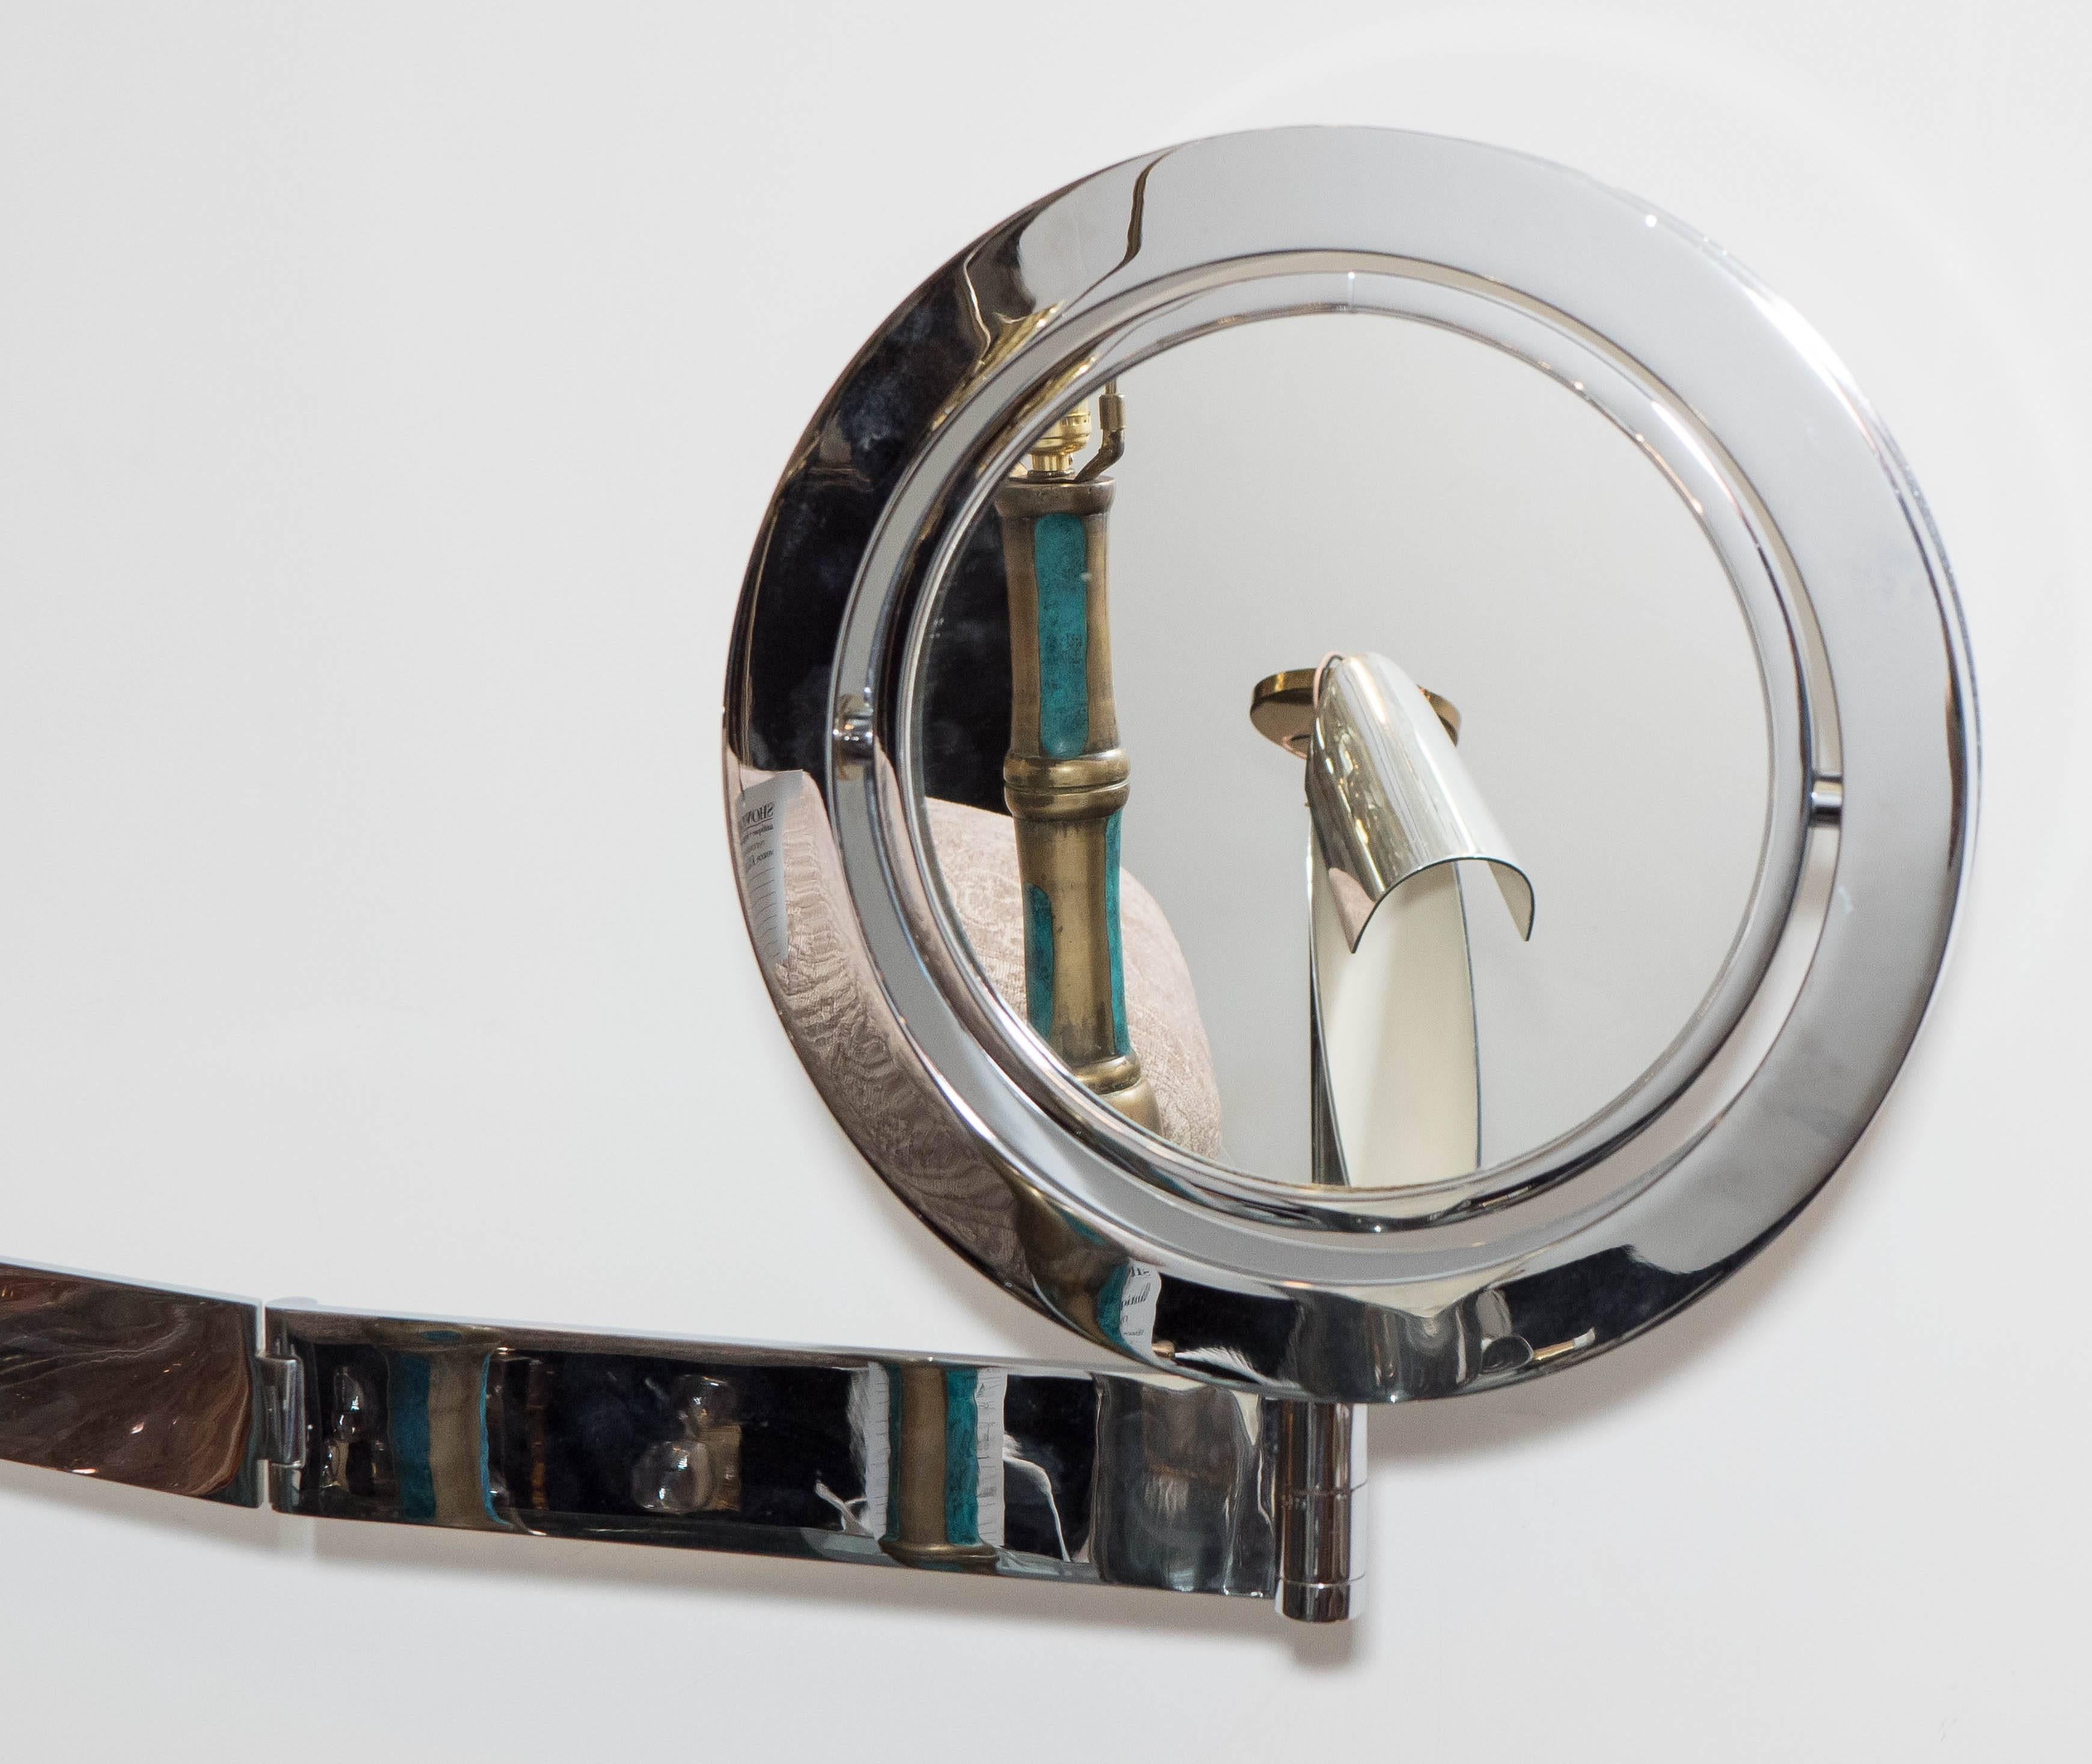 A chrome wall-mounted 'Saturn mirror,' intended for shaving or makeup application, featuring an adjustable arm, with a pivoting mirror that magnifies on one side. Good condition, wear to the chrome consistent with age and use, with minor scuffs to